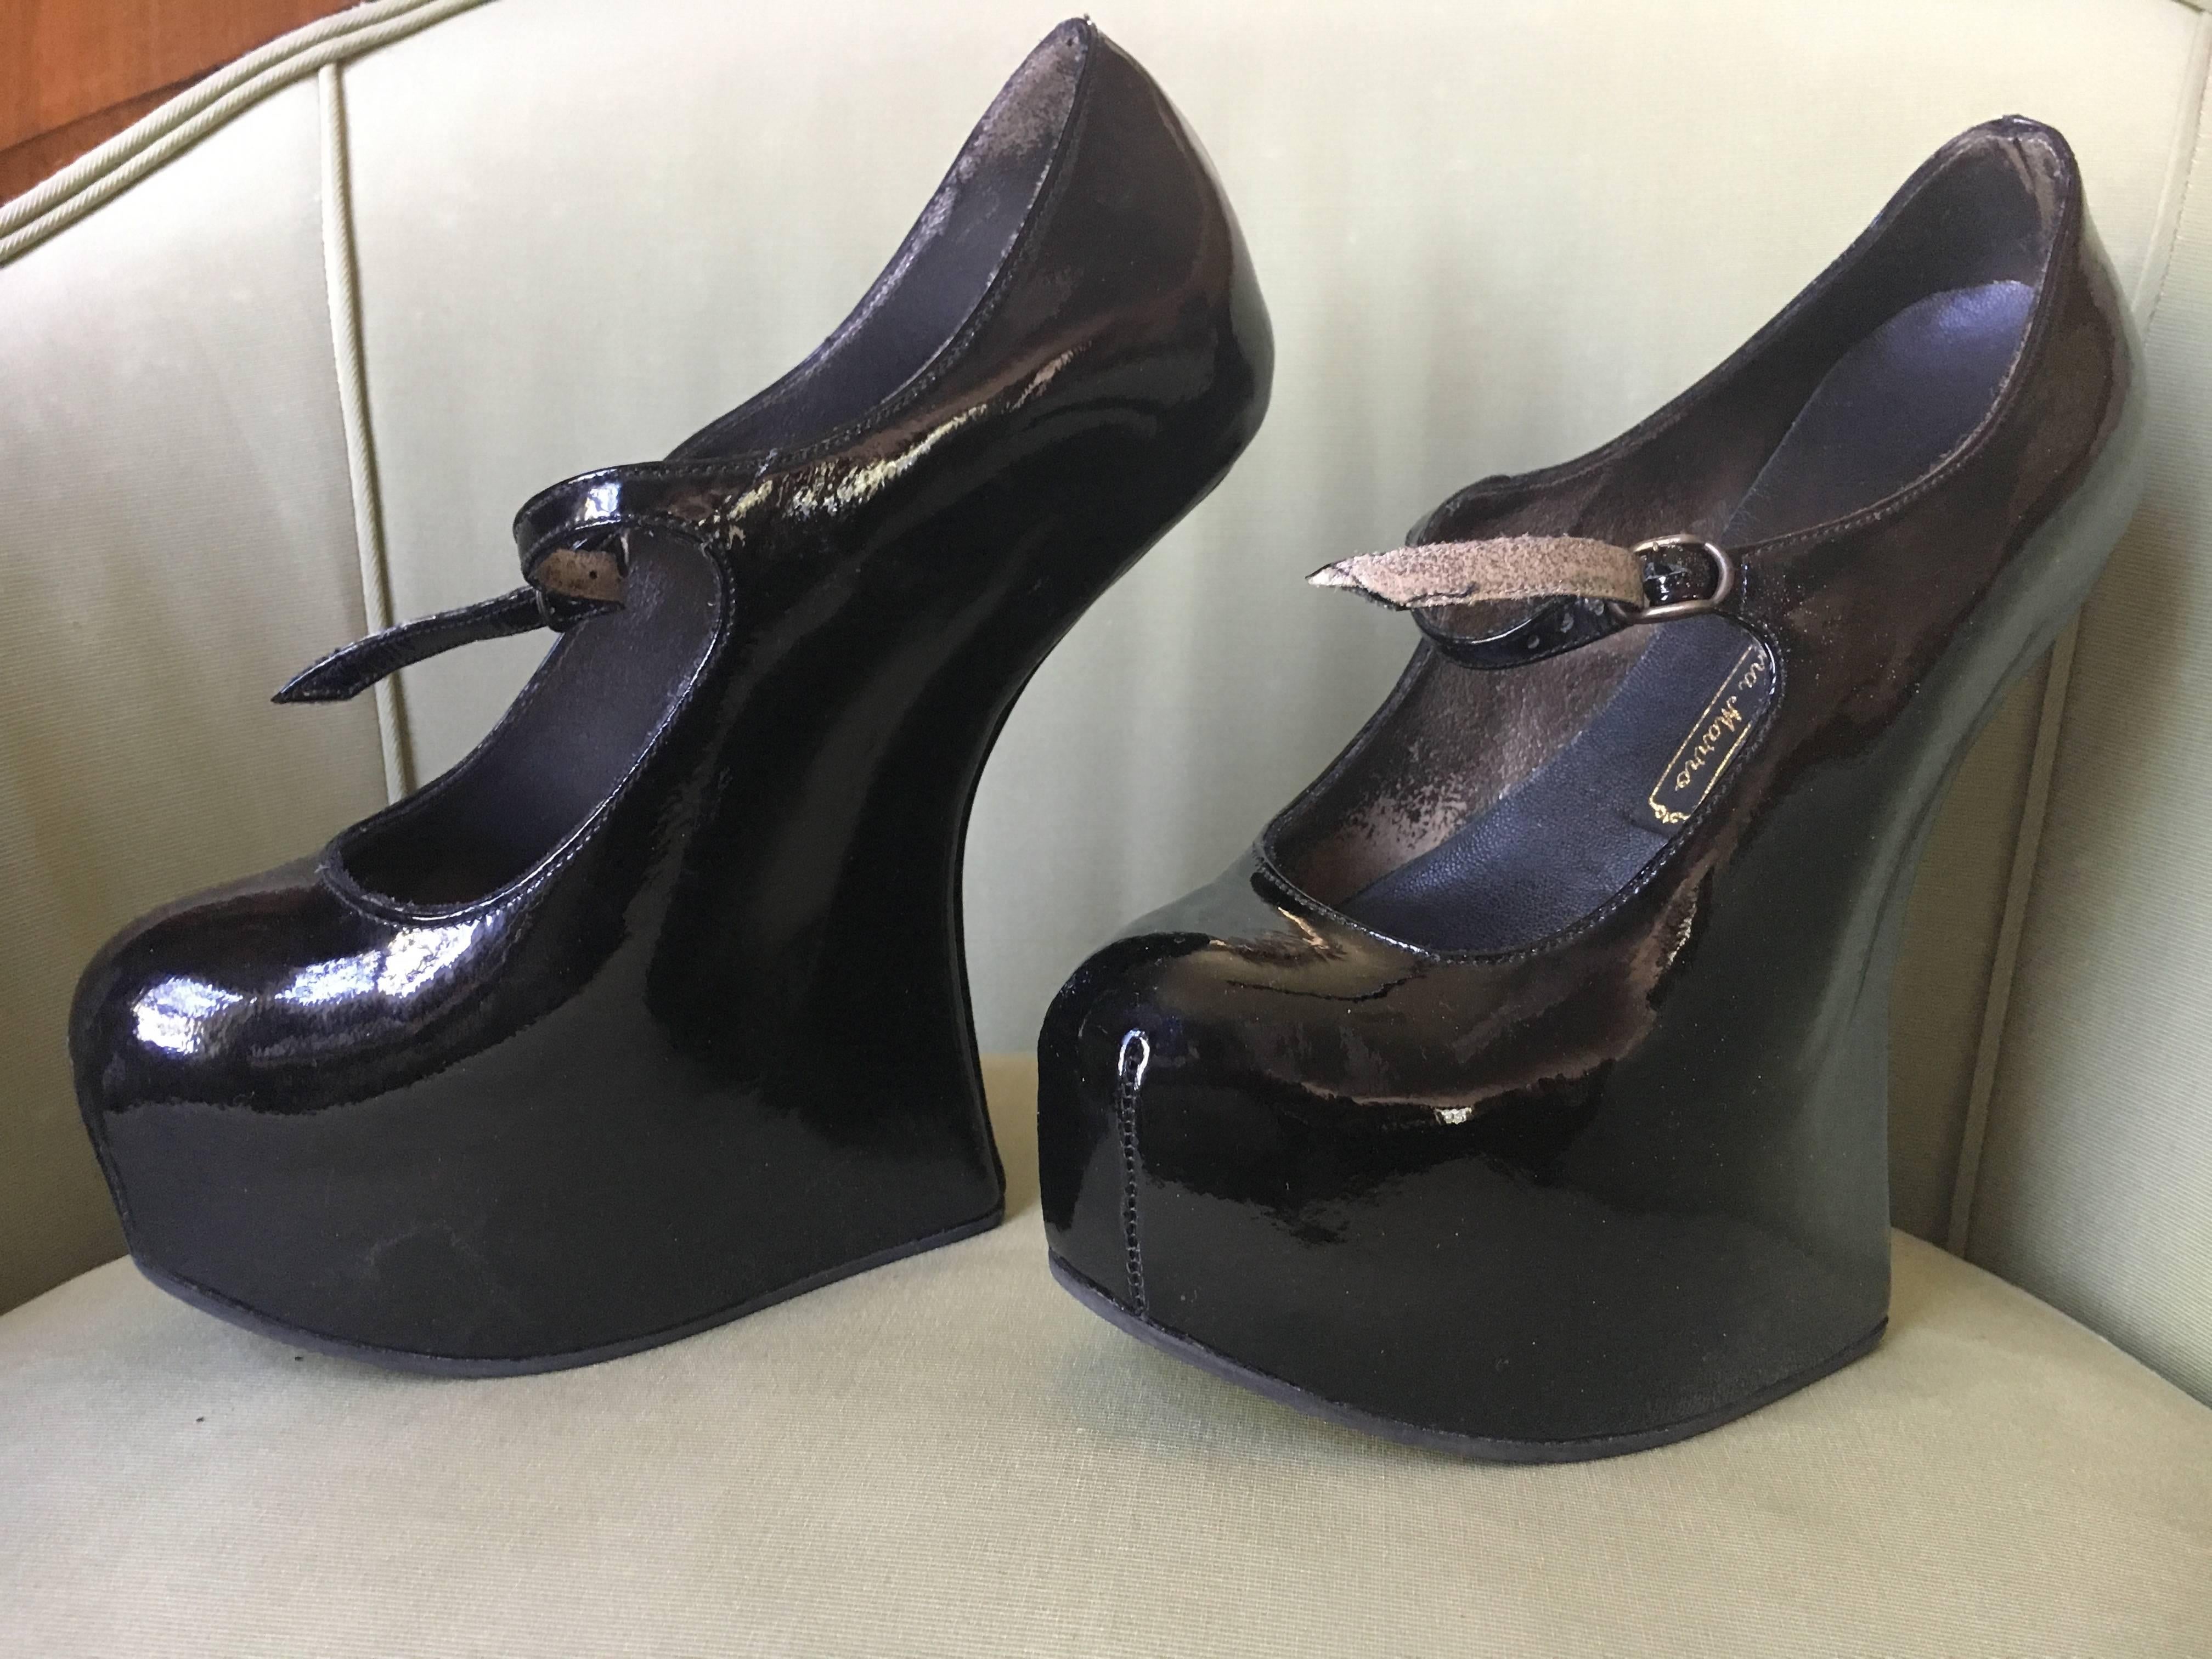 Natacha Marro London Black Patent Leather Heelless Platform Fetish Mary Jane Pump.
Sz 10 US
A favorite of Daphne Guinness and Lady Gaga, these shoes are amazingly comfortable
Great pre owned condition